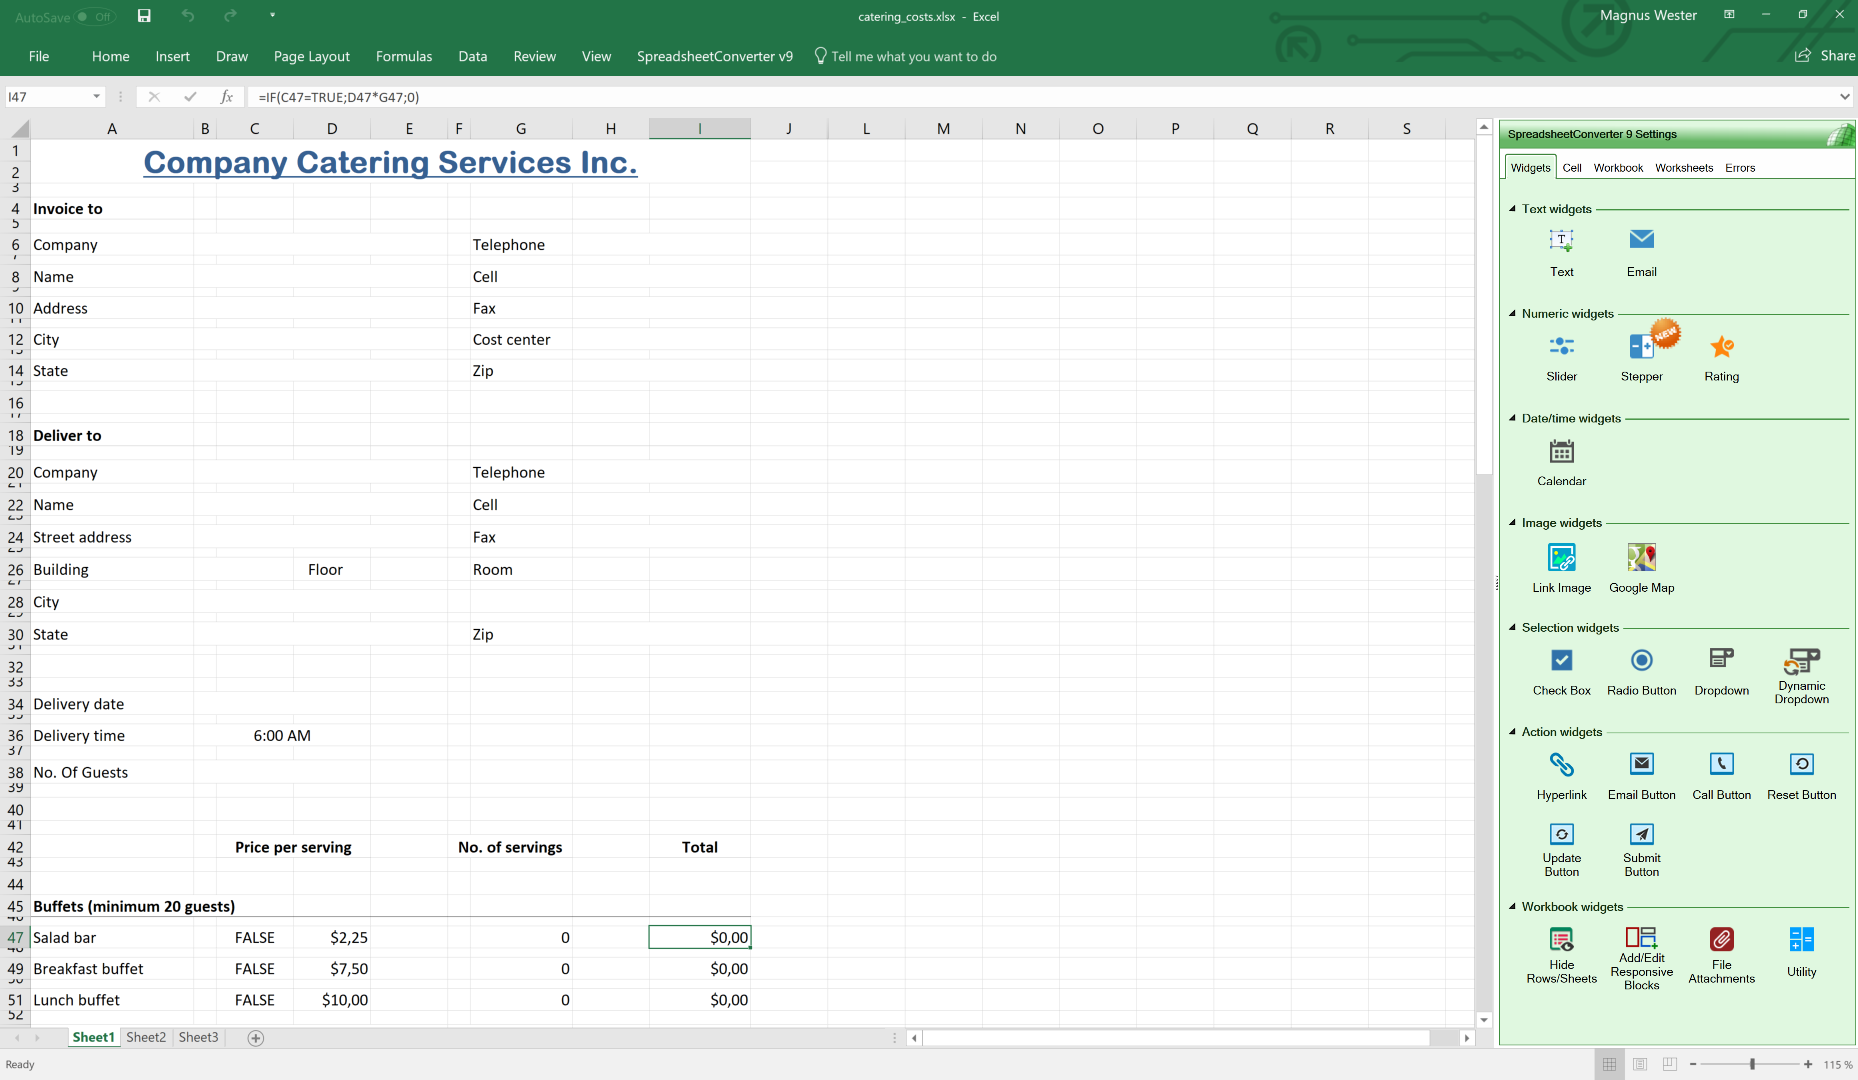 Screenshot of a catering form in Excel